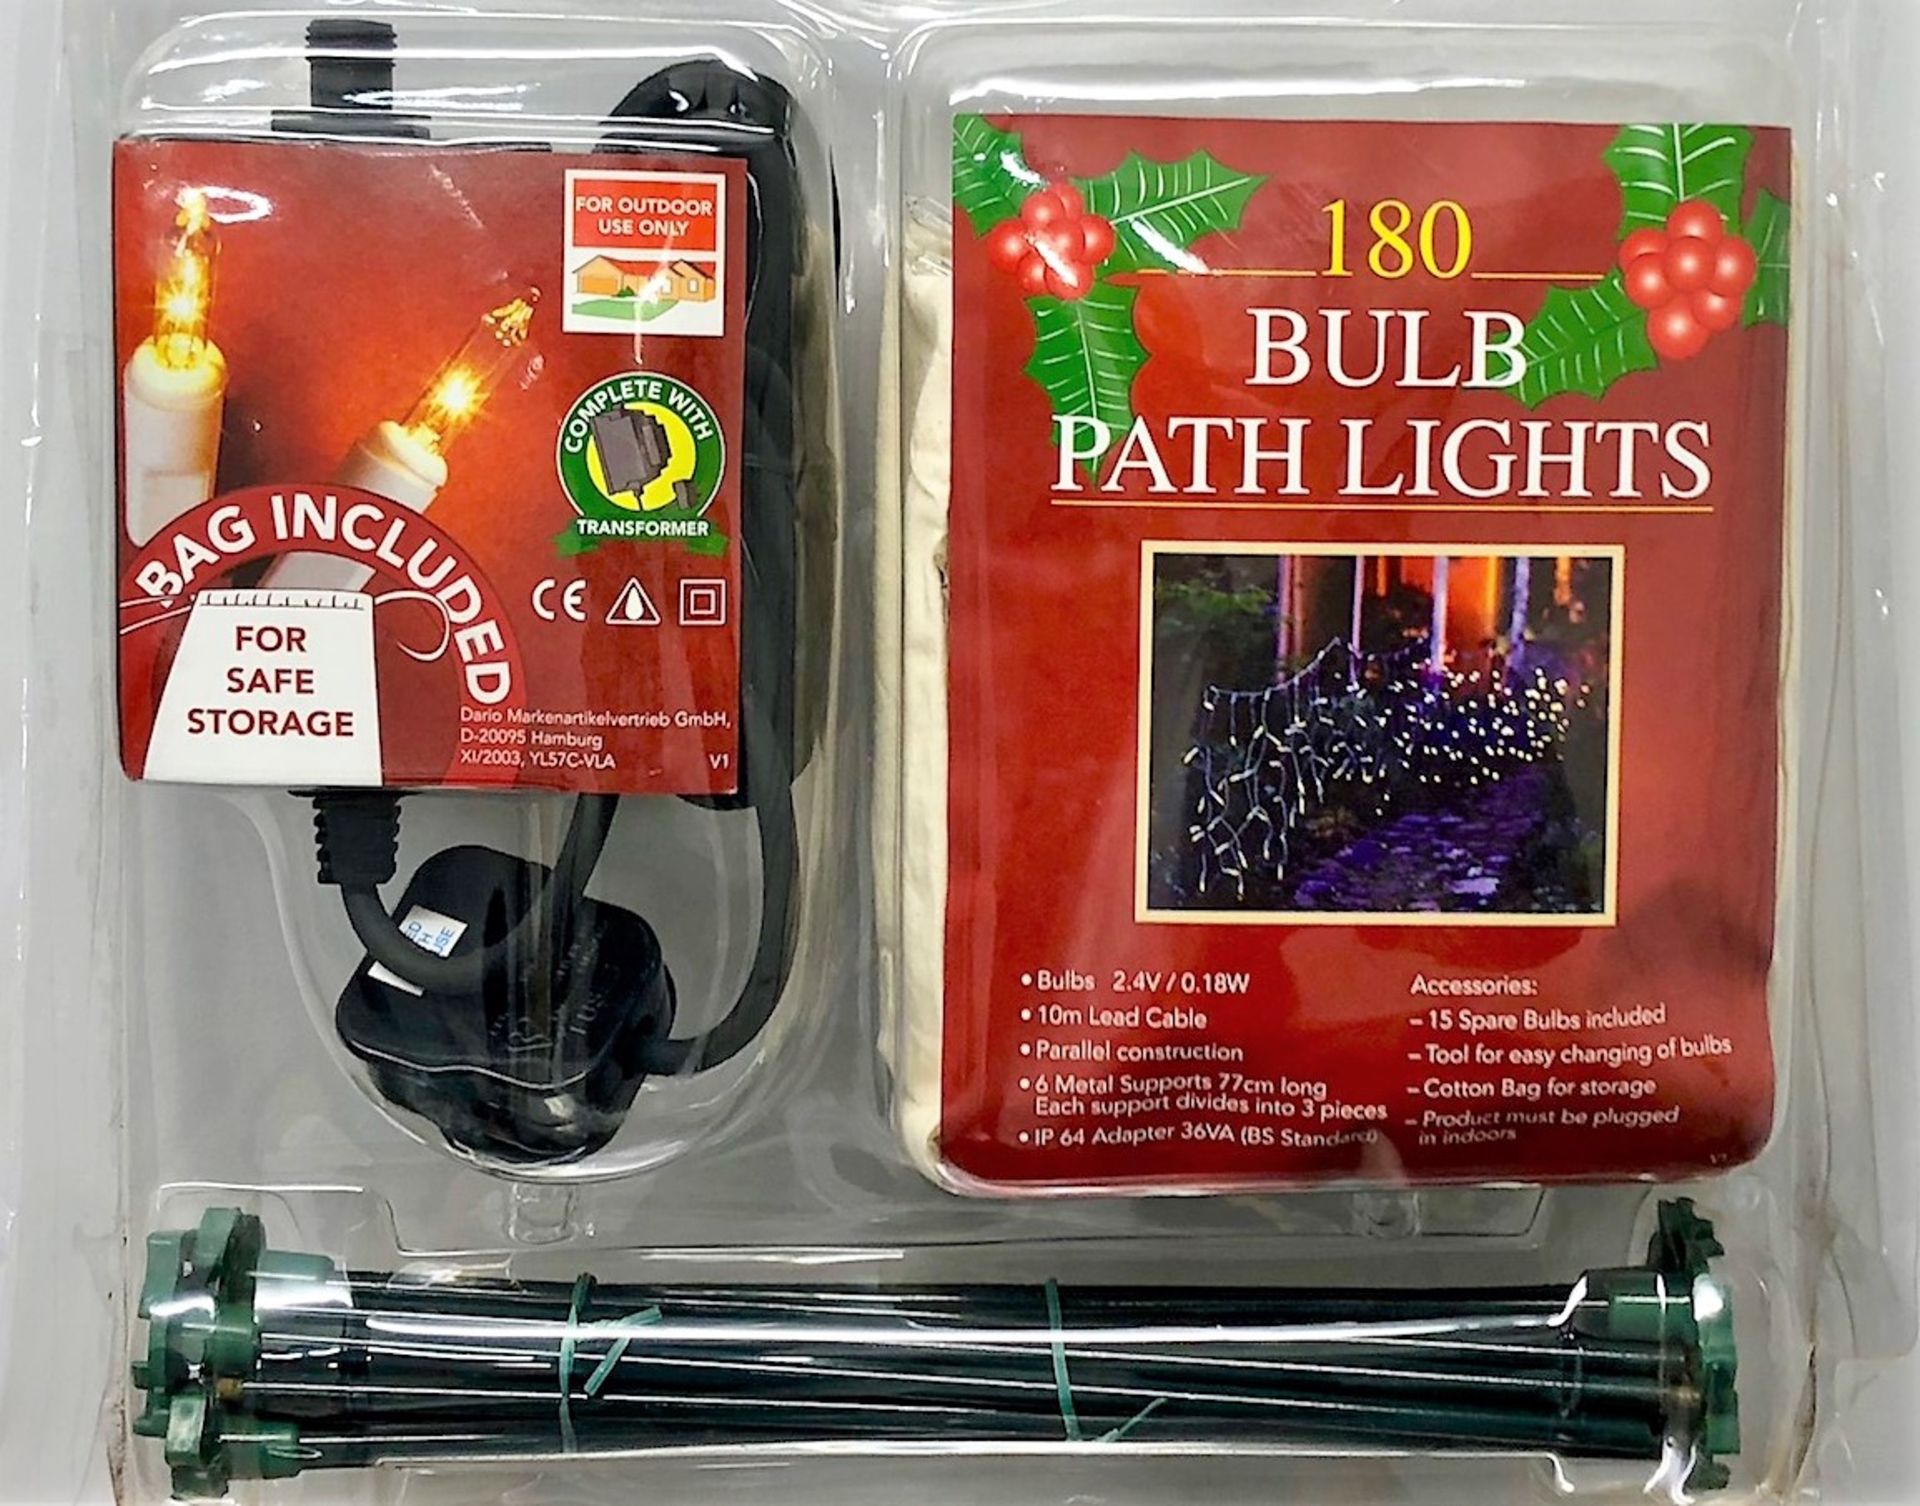 V Brand New 180 Bulb Path Lights - 2.4V / 0.18W Bulbs - 10m Lead Cable - 6 Metal Supports 77cm